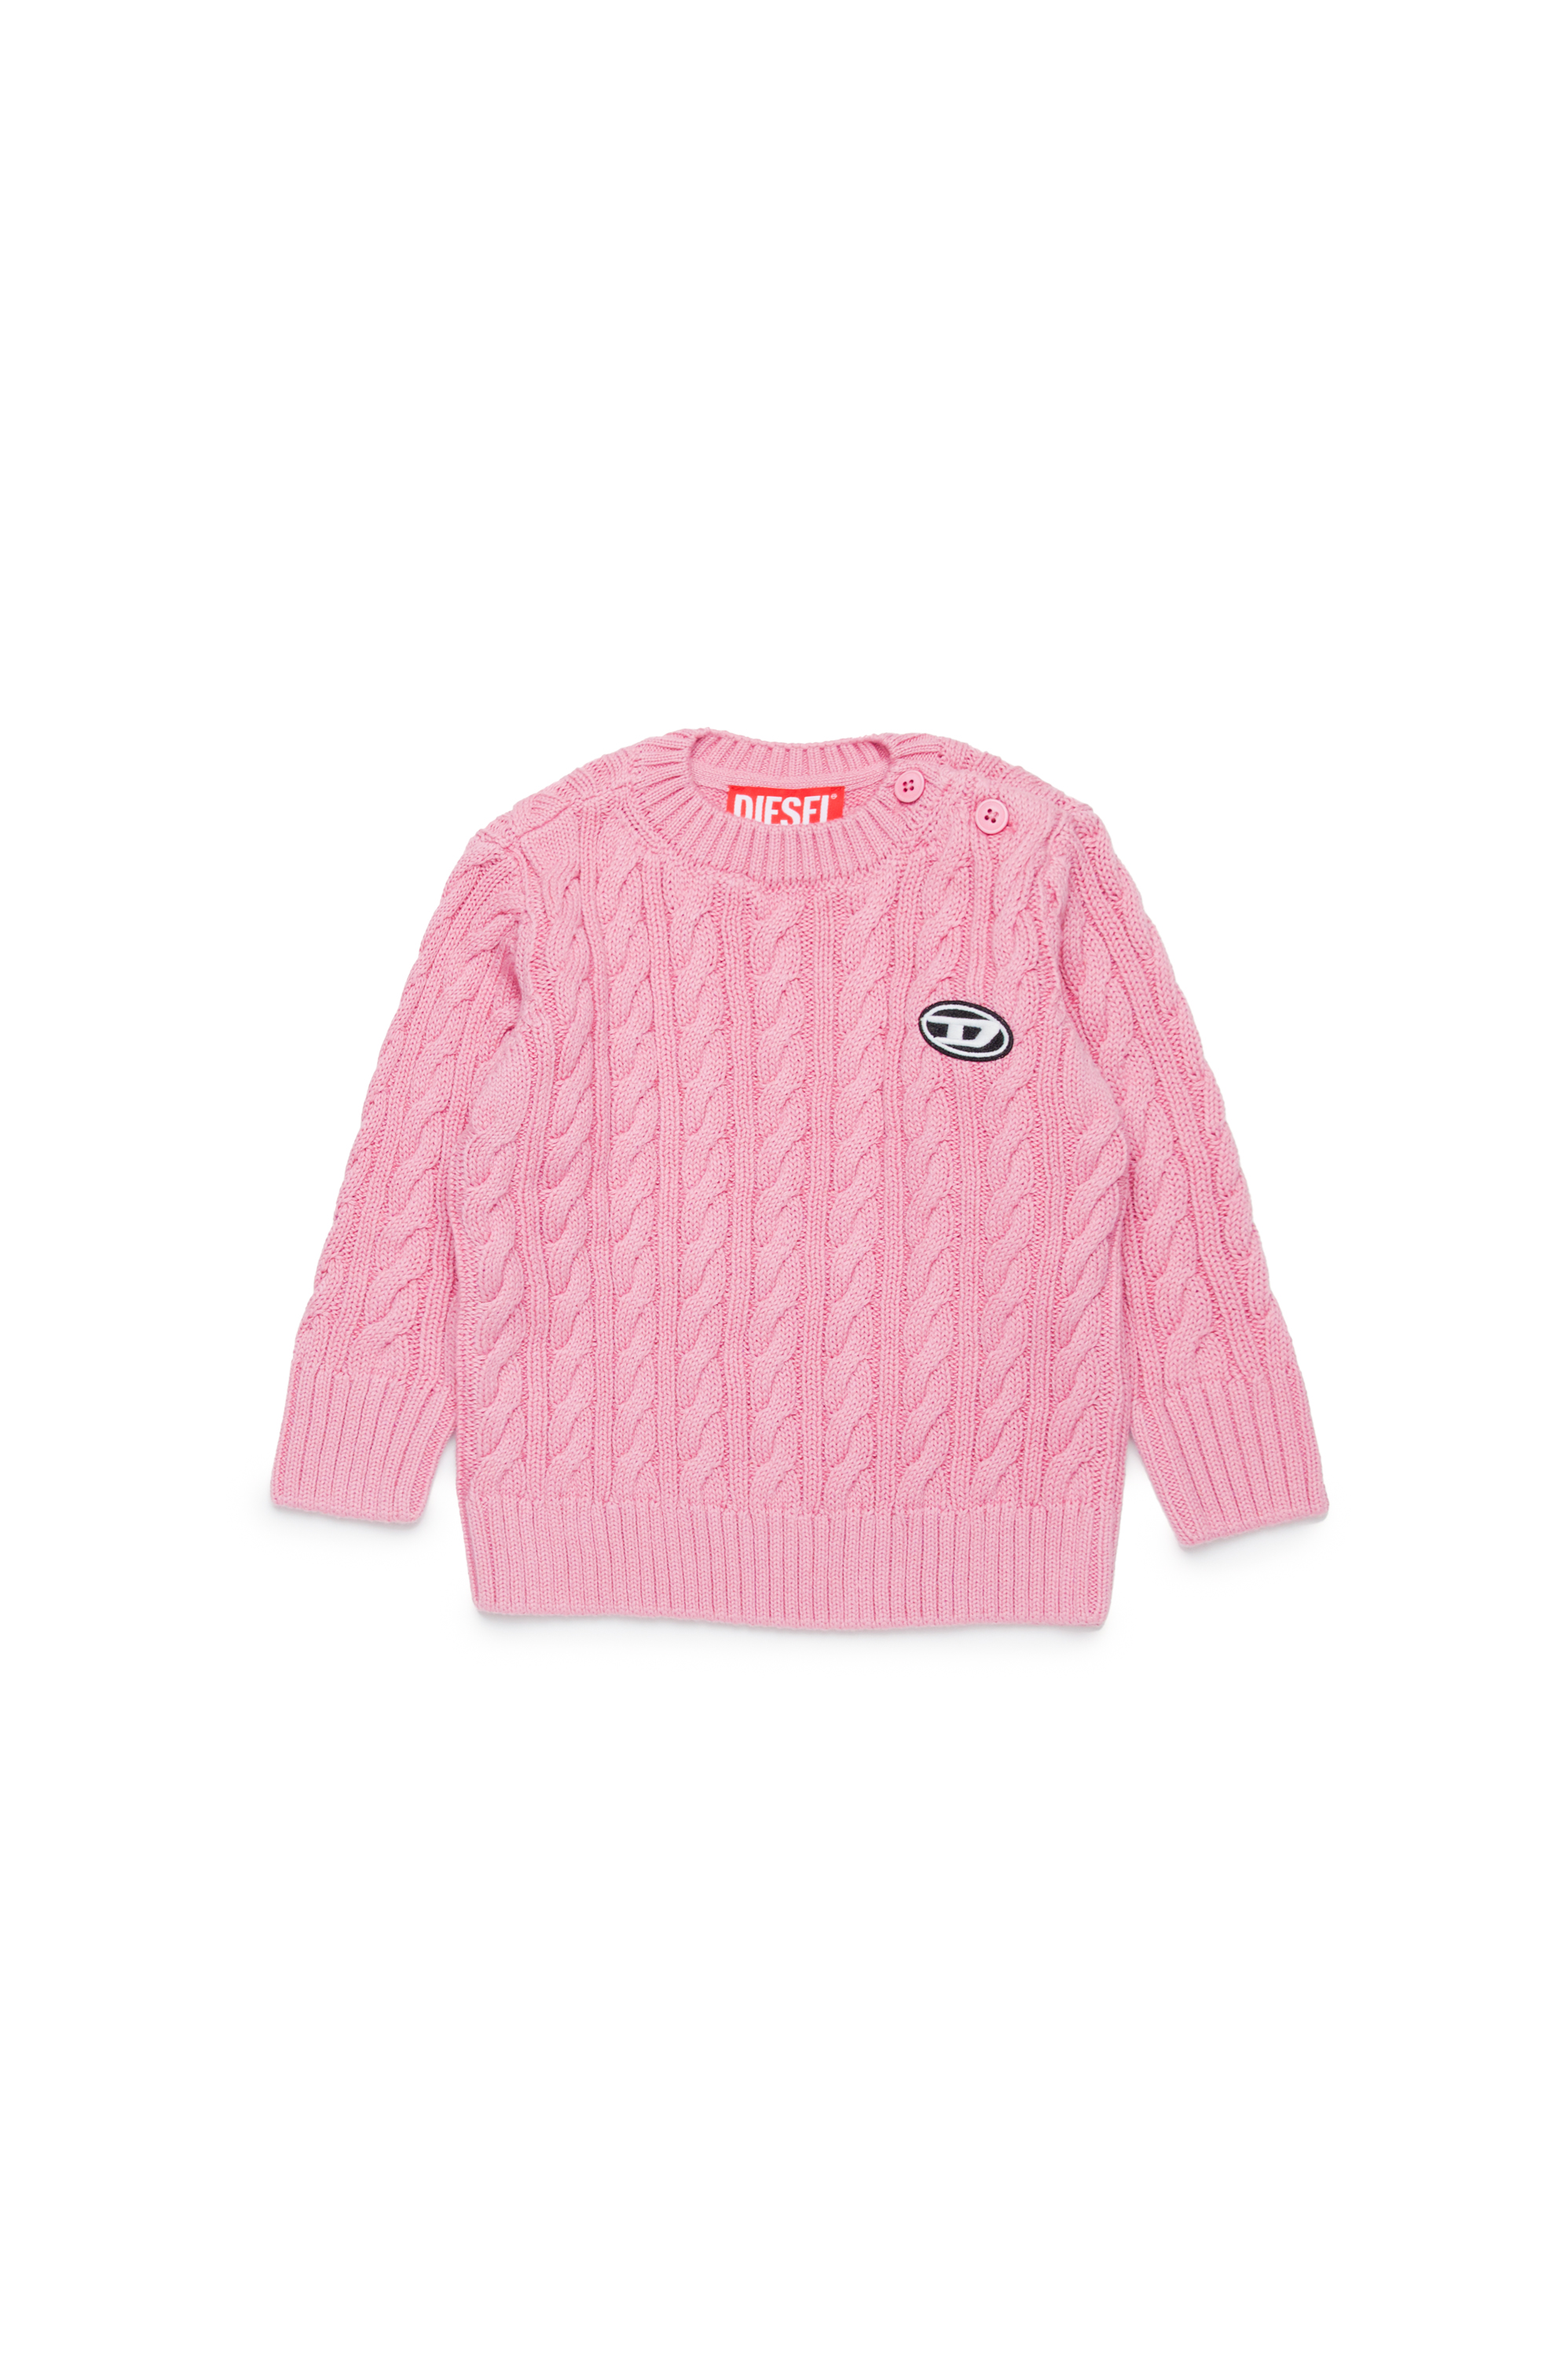 Diesel - KBAMBYB, Unisex Cotton jumper with Oval D patch in Pink - Image 1